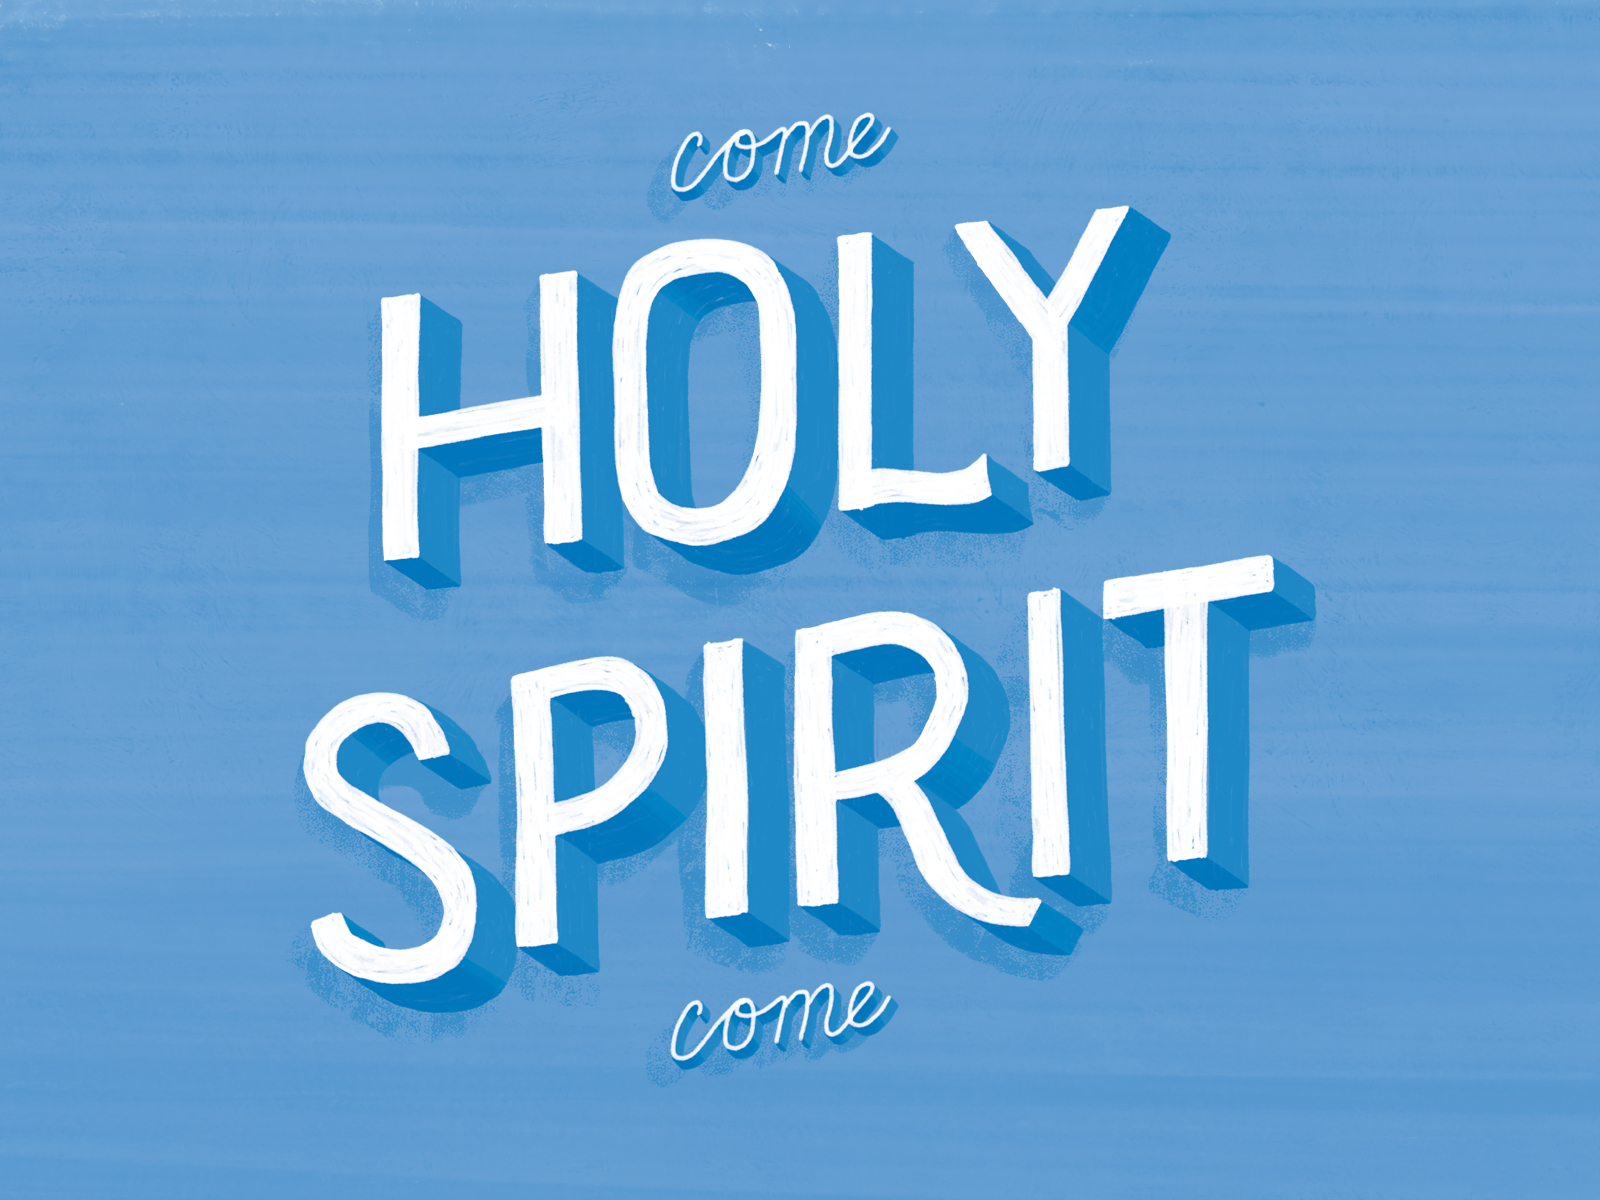 A blue background with white lettering that reads "Come Holy Spirit Come"